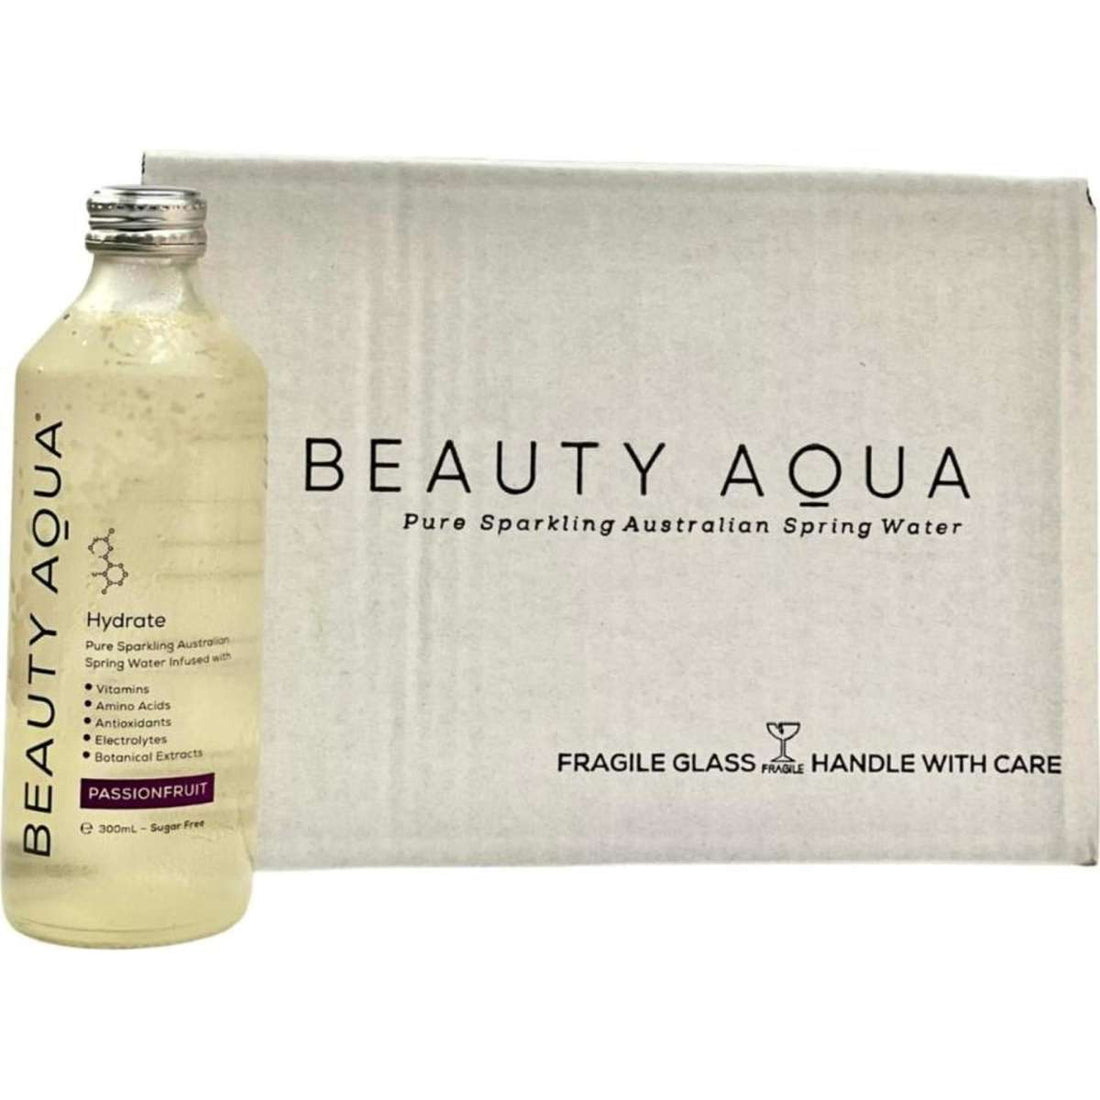 BEAUTYAQUA Hydrate Passionfruit Spring Water Spritzer 12 x 300ml Sparkling